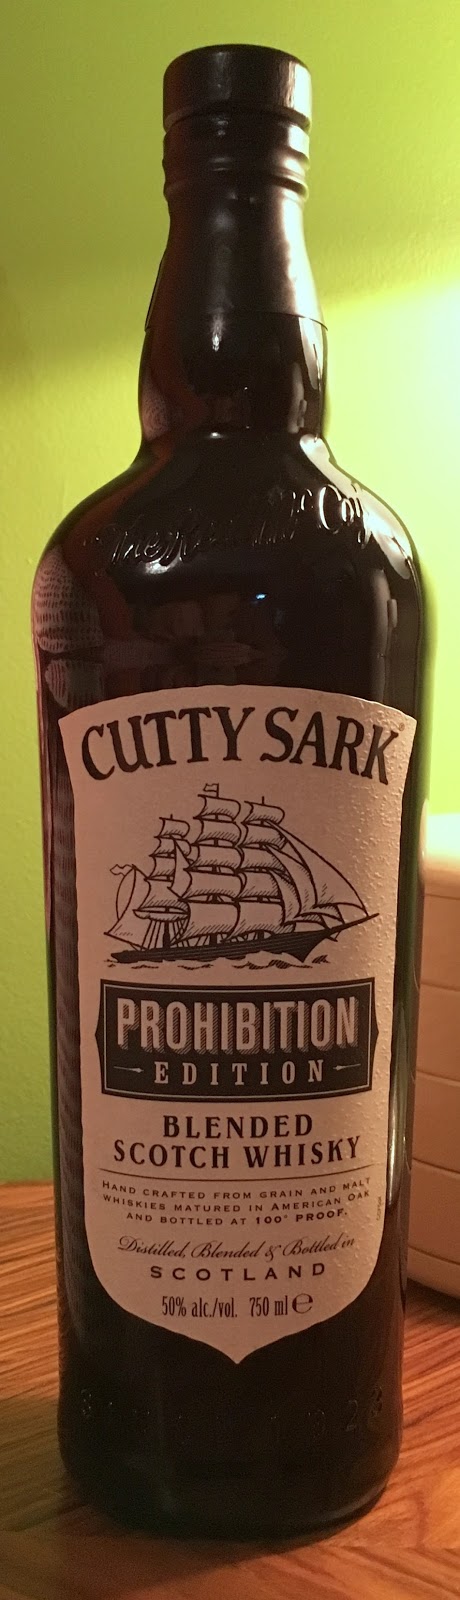 Chemistry Of The Cocktail Whisky Review Cutty Sark Prohibition